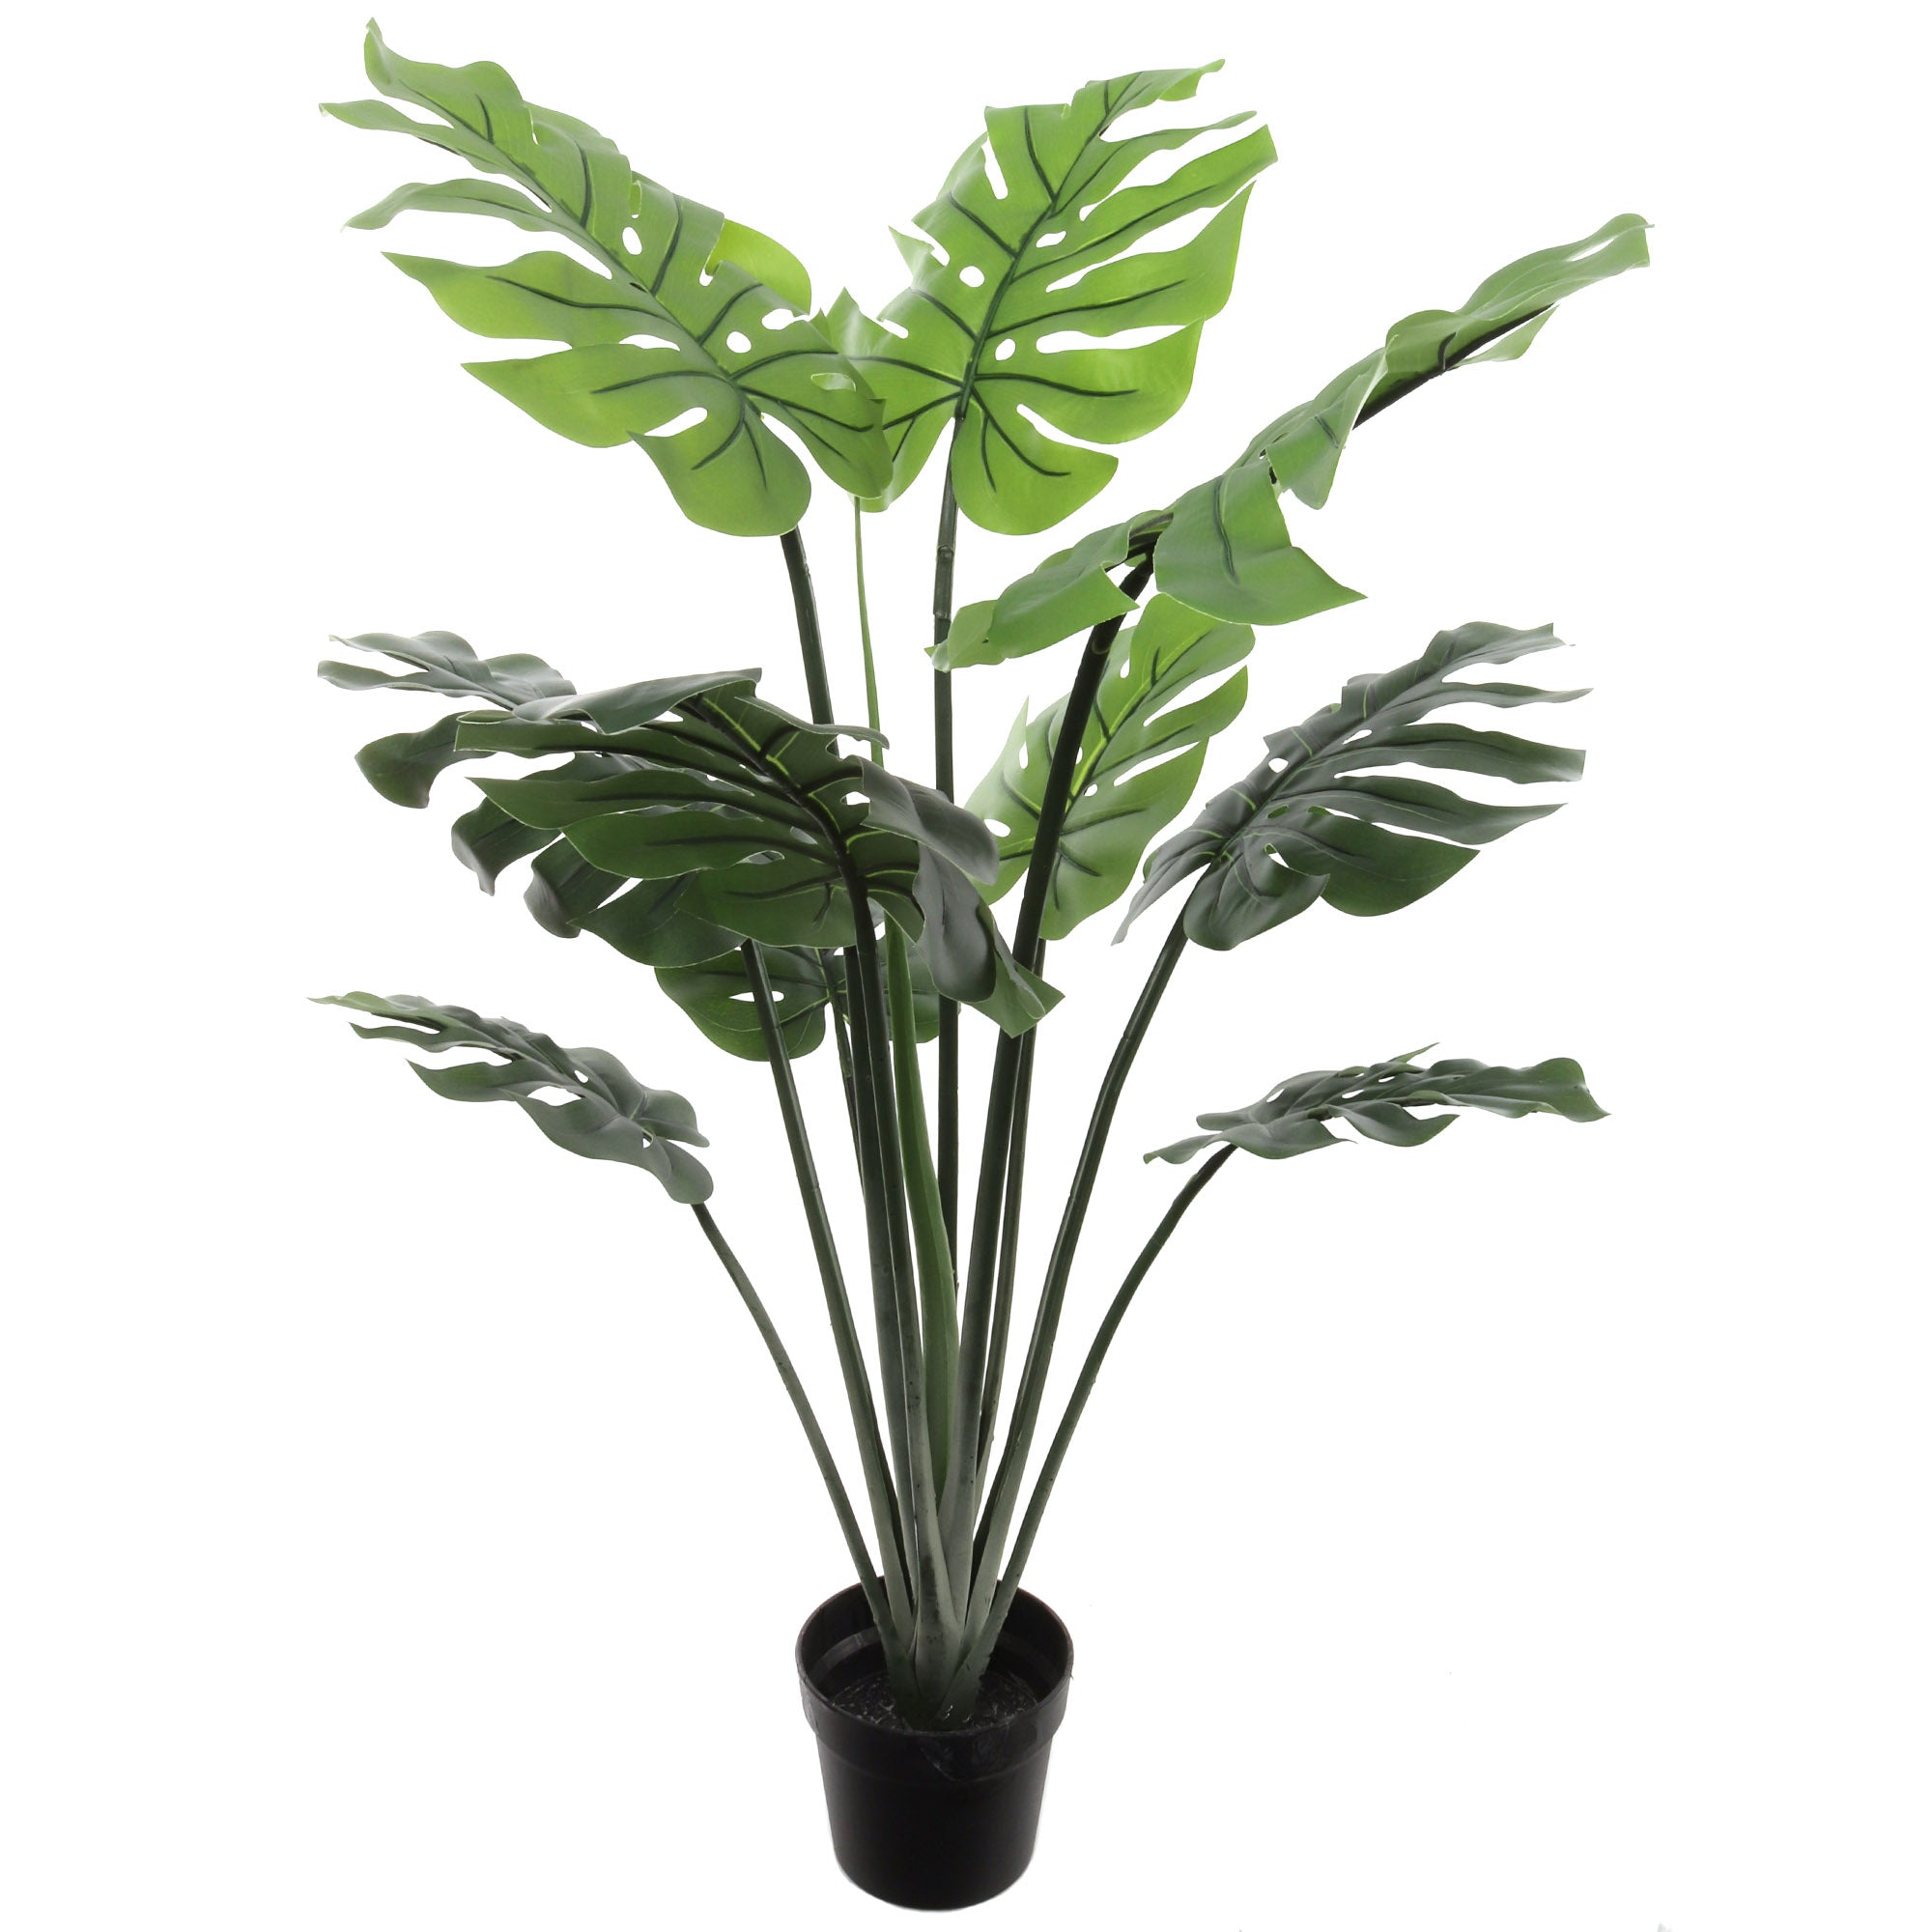 Artificial 36" Split Philo Plant in Pot - Lifelike Faux Indoor Greenery Decor, Easy-to-Maintain, High-Quality & Eco-Friendly - Perfect for Home & Office Spaces Artificial Plants ArtificialFlowers   